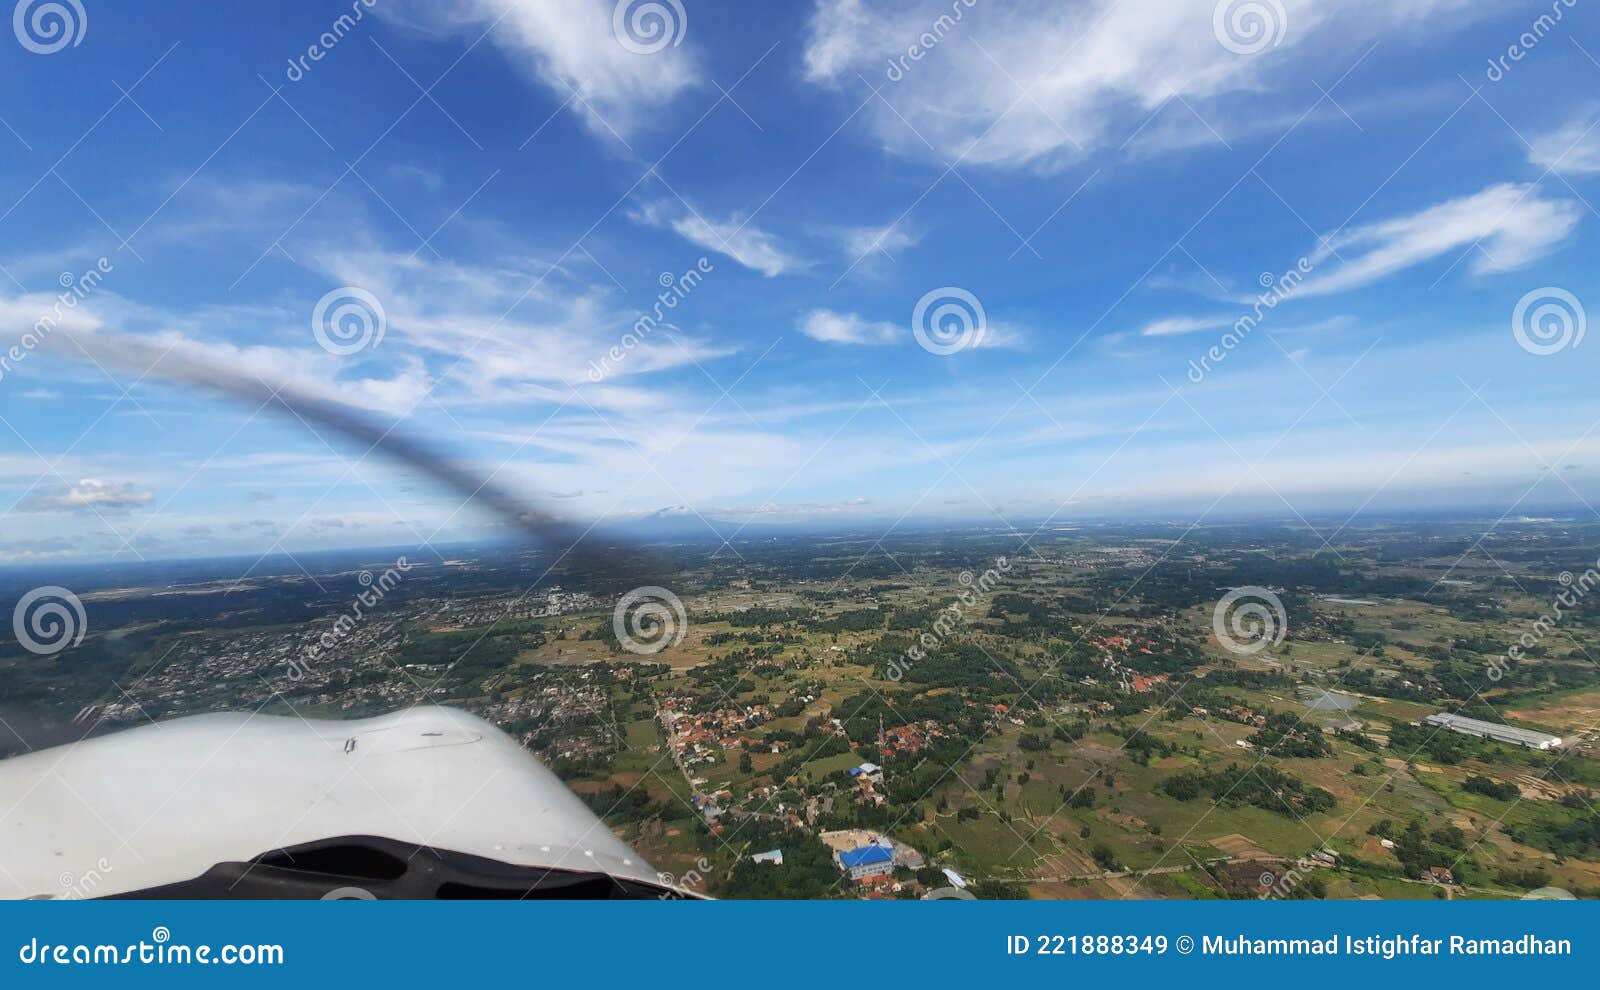 Sky Shoots in a Clear Weather Stock Image - Image of mountain, clear ...